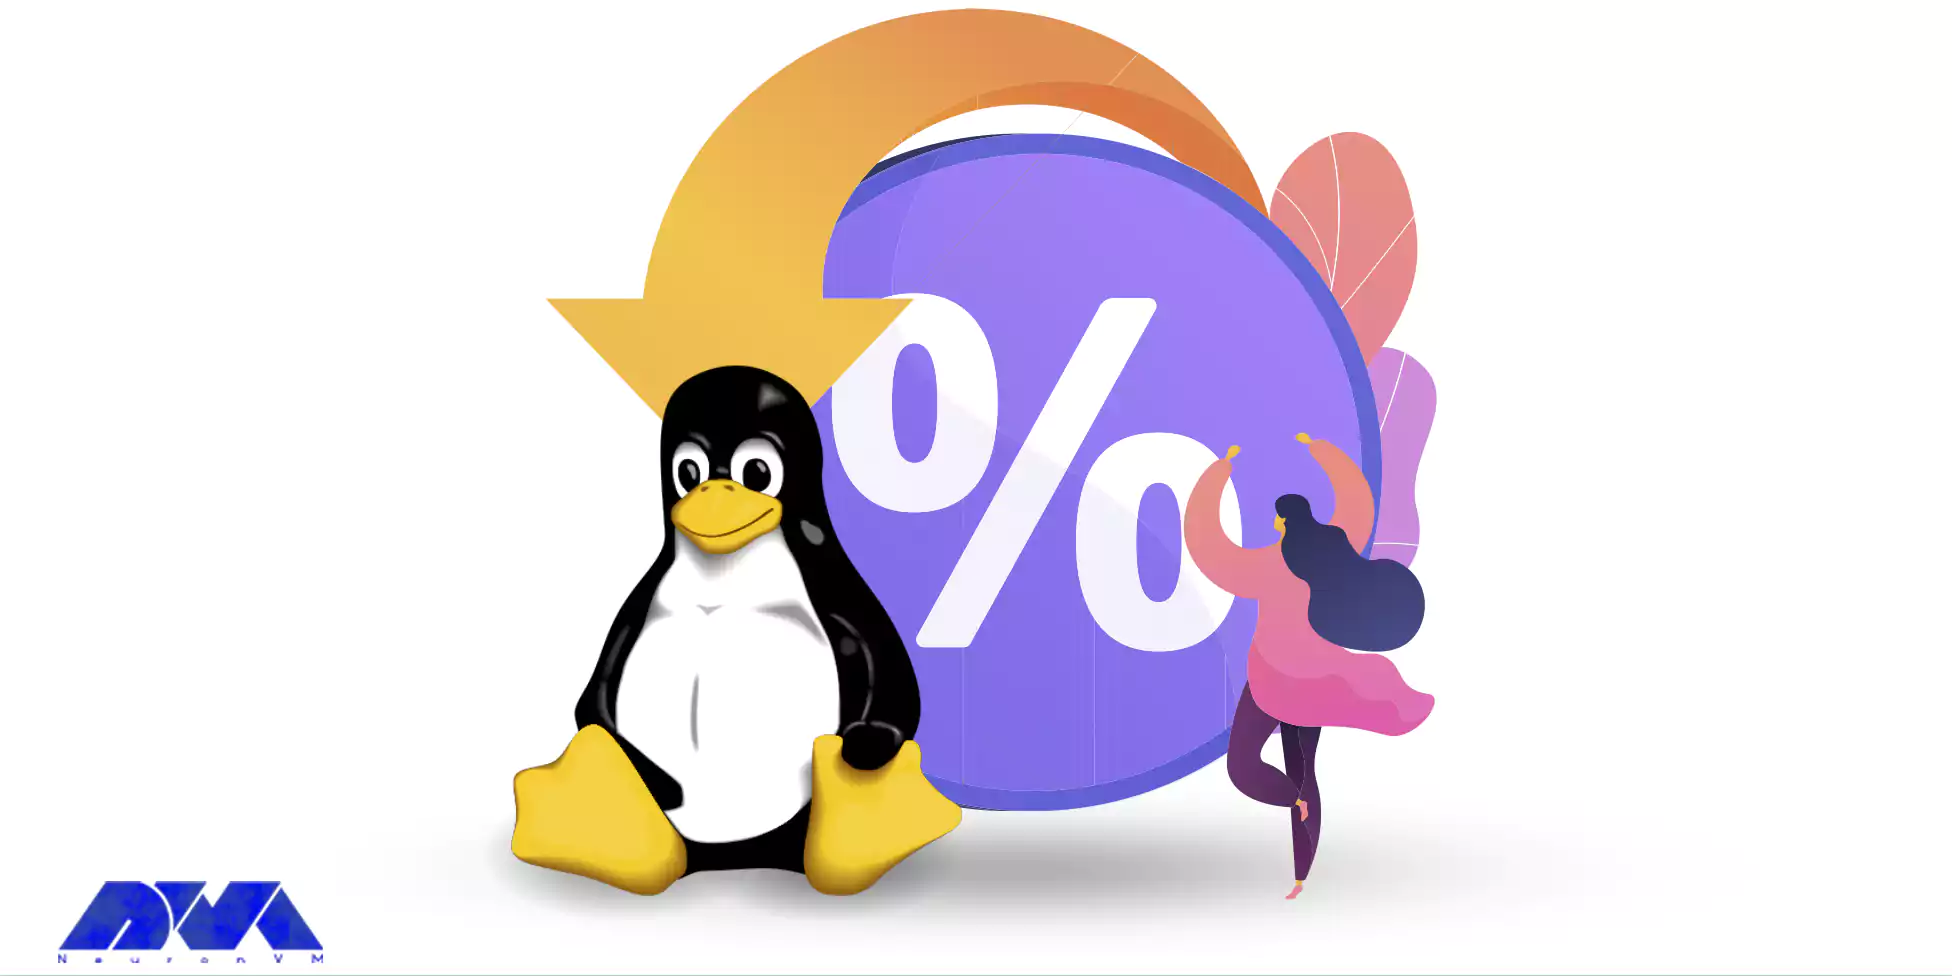  finding the best deals on Linux VPS